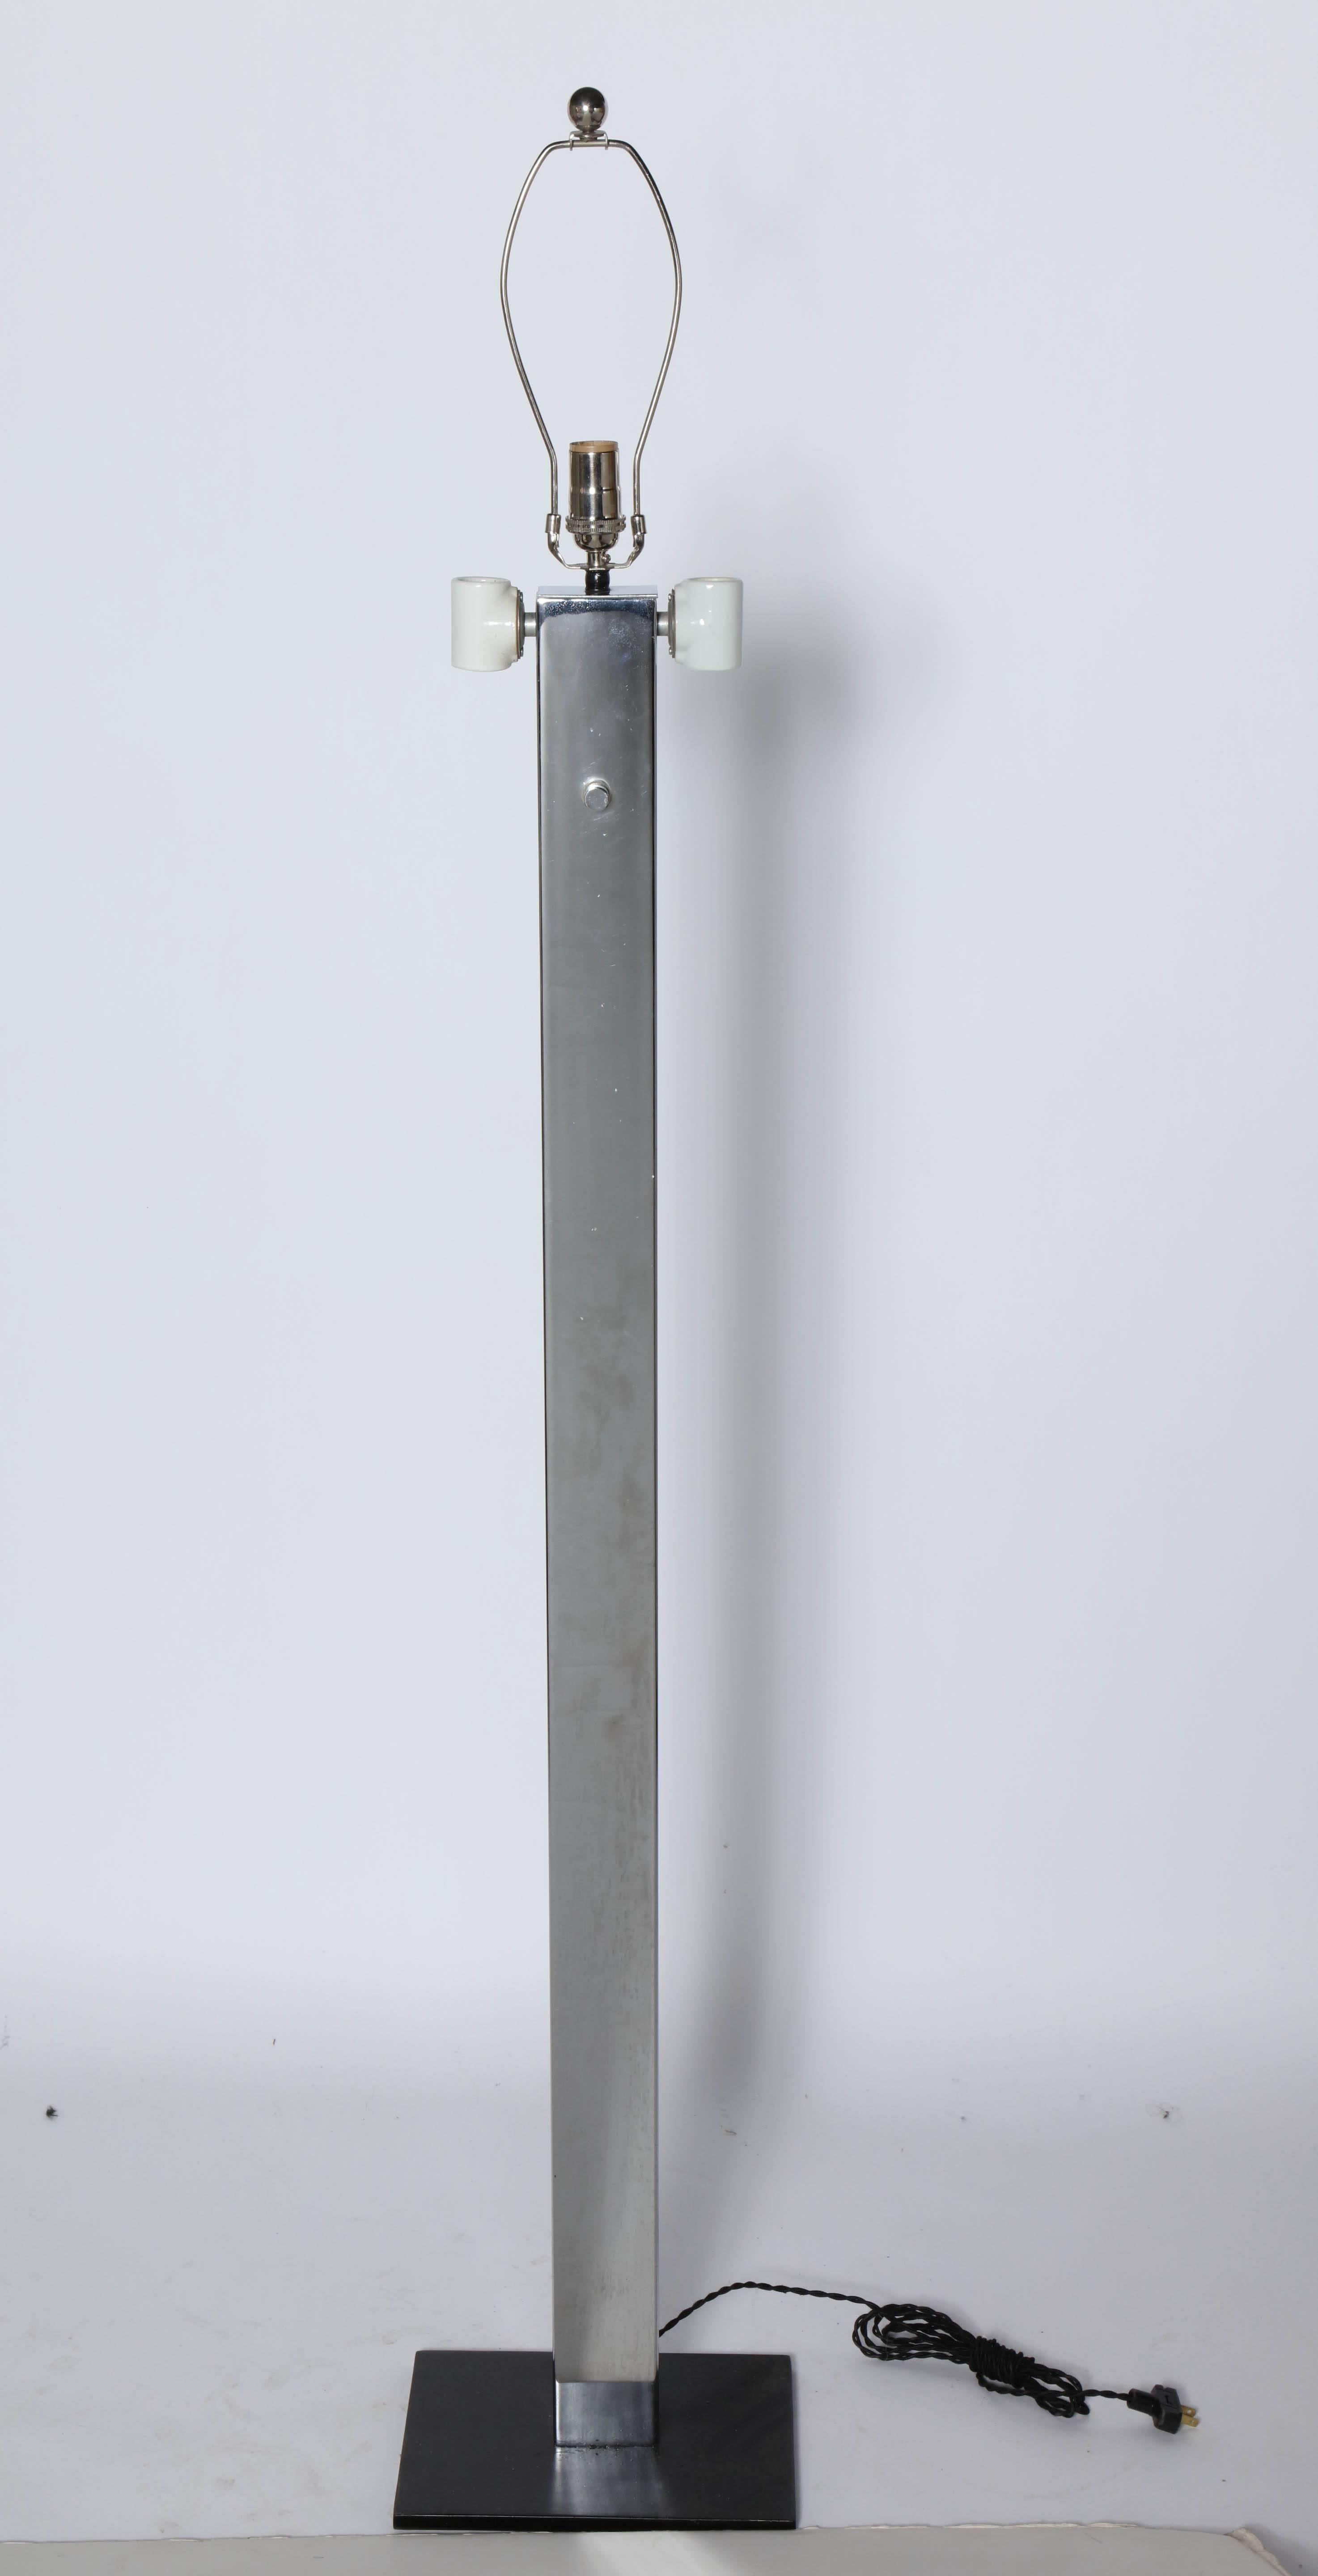 Enameled George Kovacs, International Style, Chrome Floor Lamp with Five Sockets, 1970's For Sale